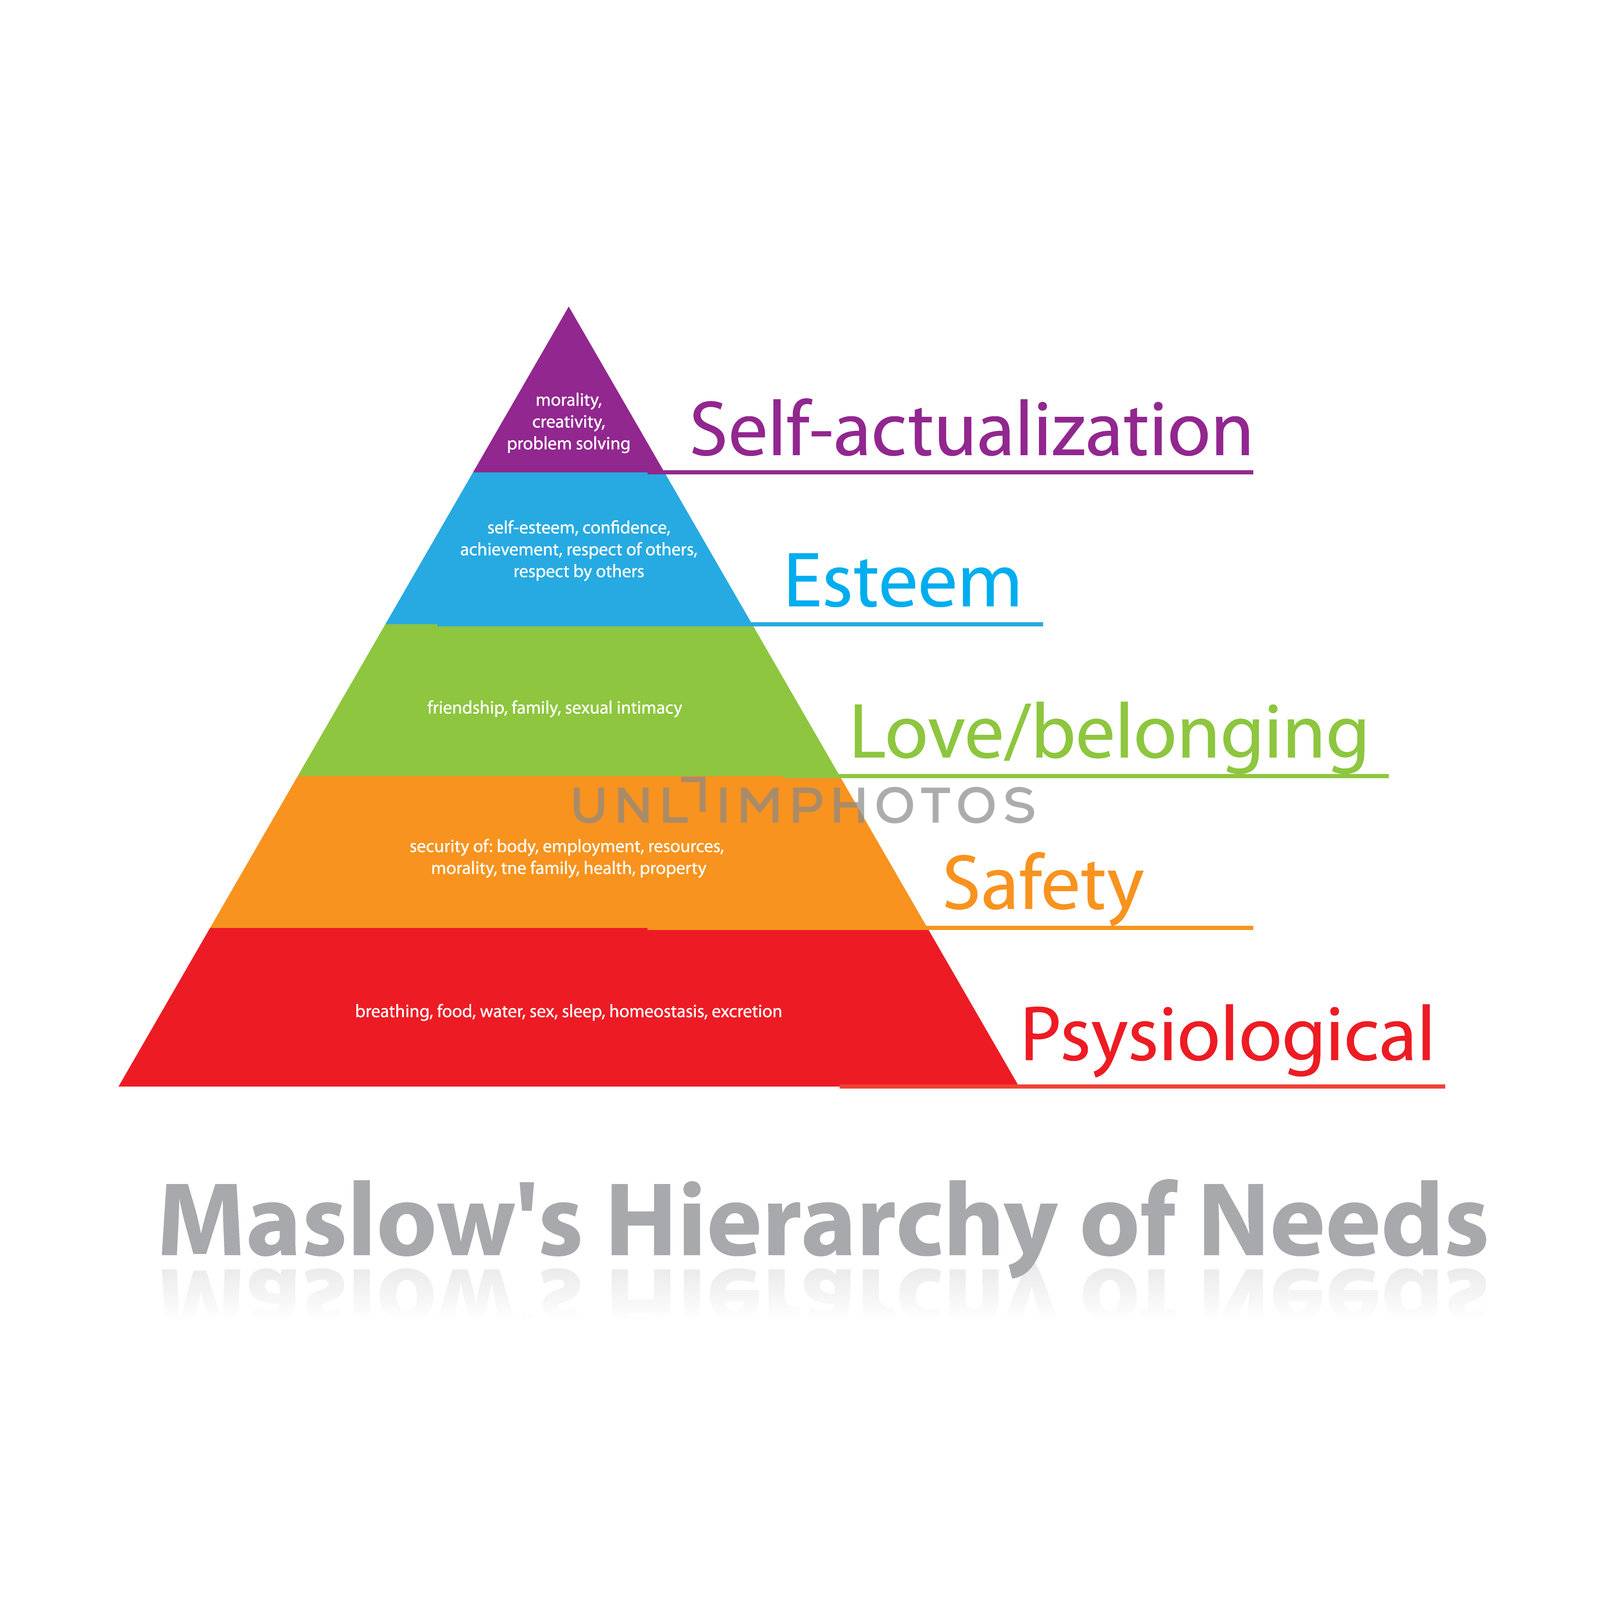 Maslow's pyramid of needs - analysis of human needs and position them in a hierarchy. Psychology. Illustration. Vector.